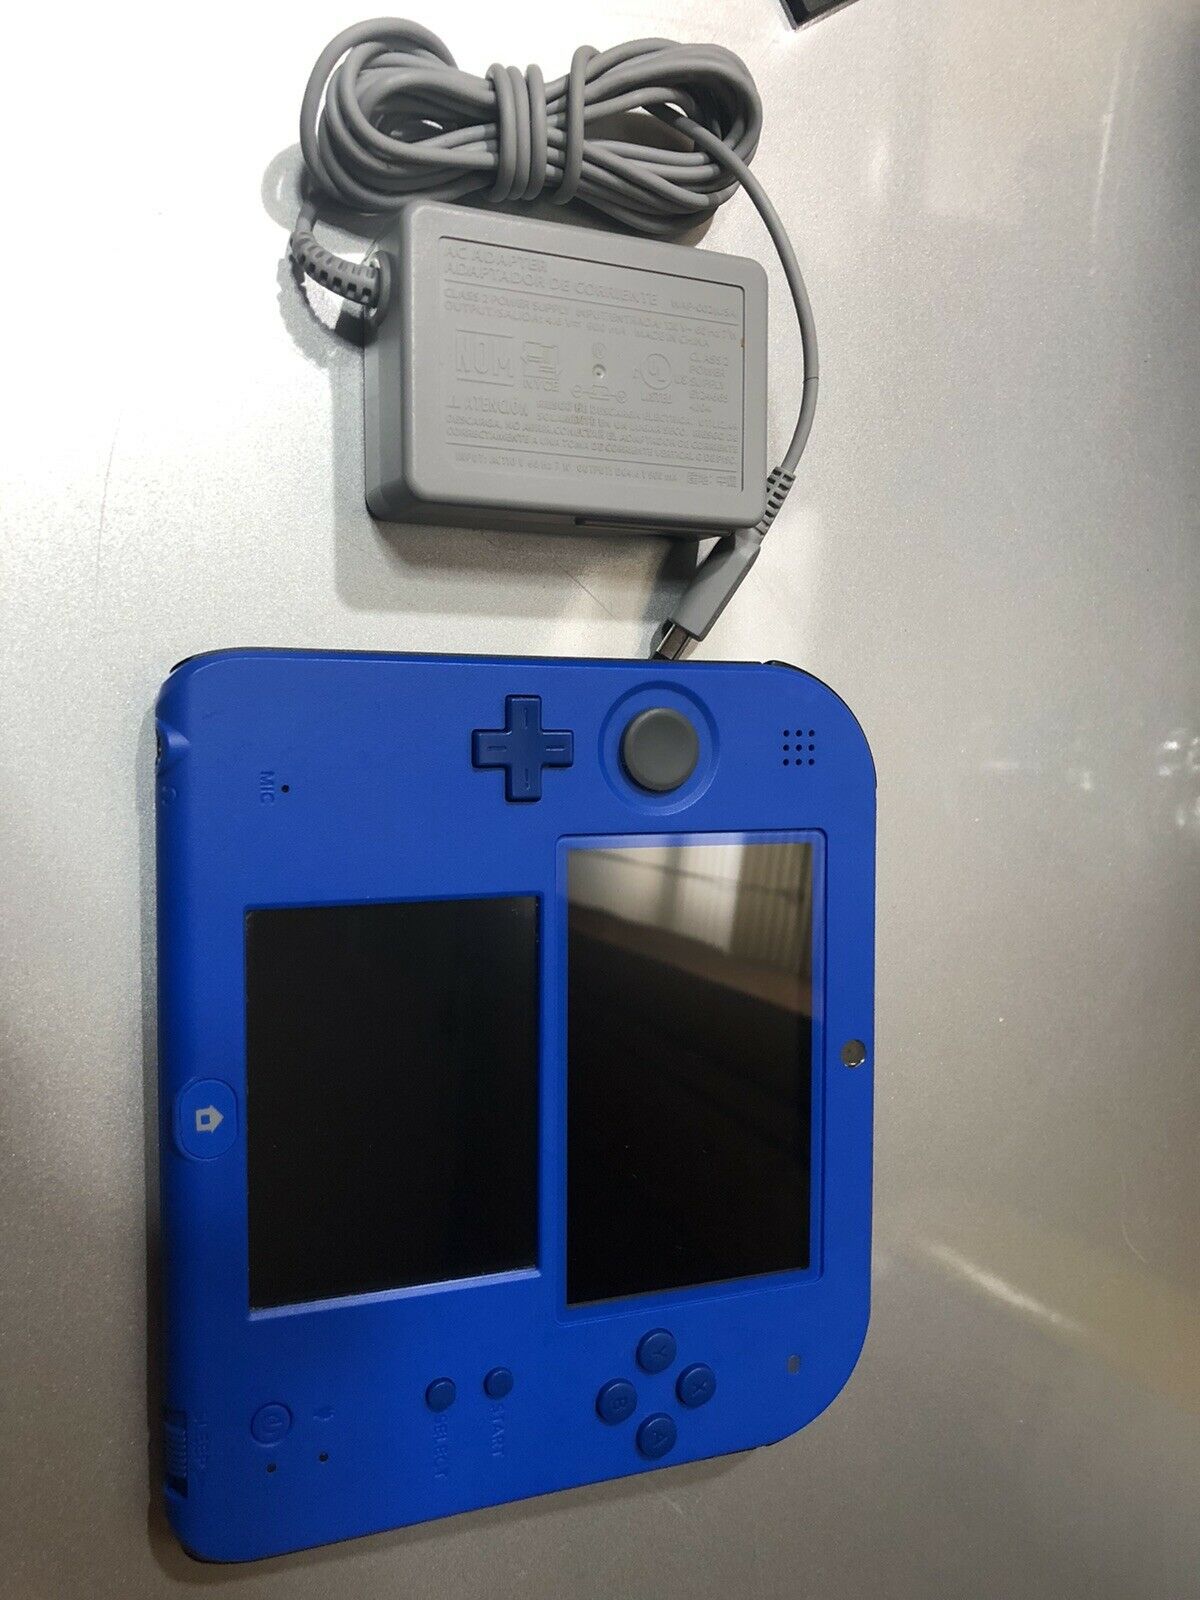 Nintendo 2DS Blue Console - With Charger & SD Card - iCommerce on Web